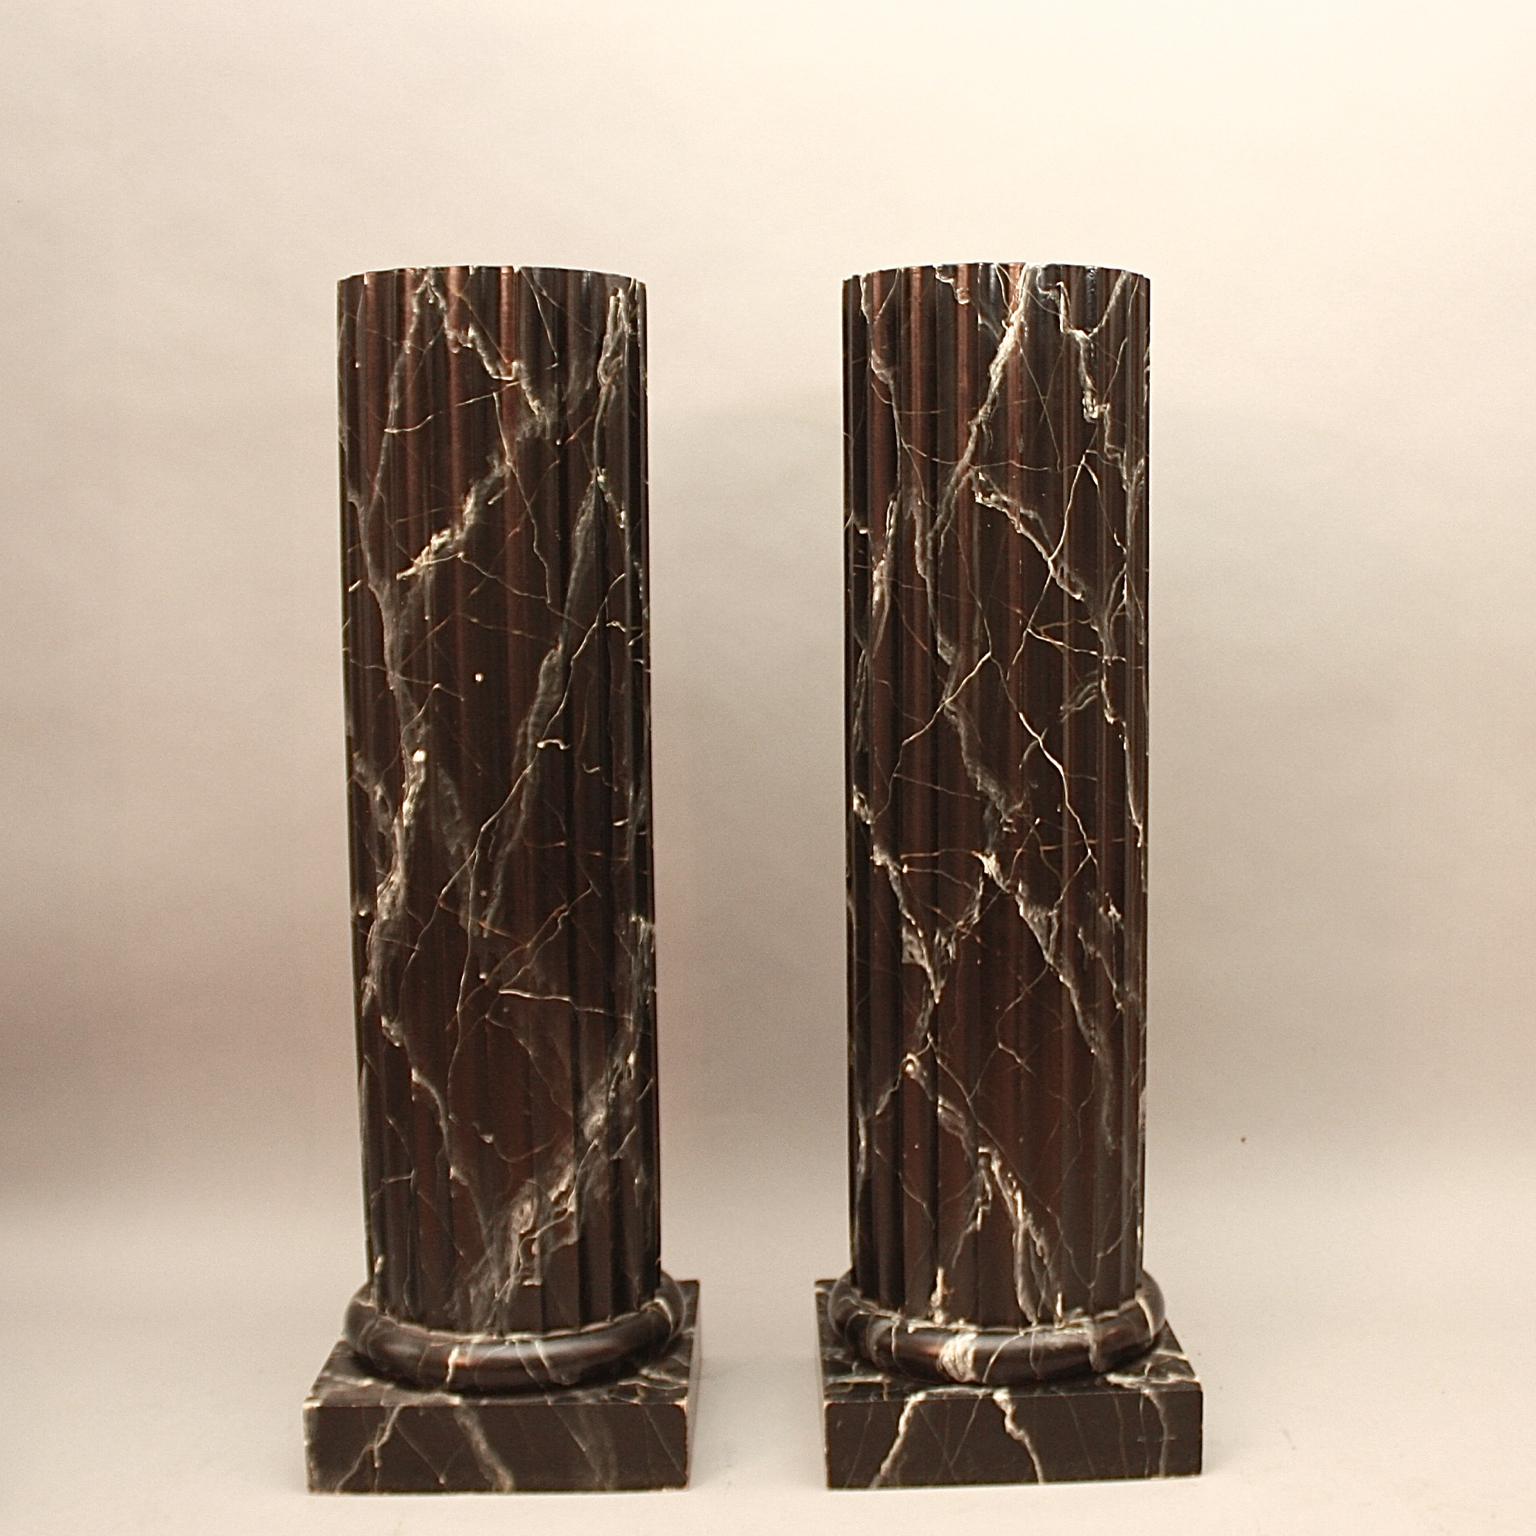 Pair of 20th Century Italian Neoclassical Ionic Order Painted Black Faux Marble Columns or Pedestals

Pair of 20th century Italian painted black faux marble columns or pedestals, each with a fluted shaft and a base enriched with mouldings resting on